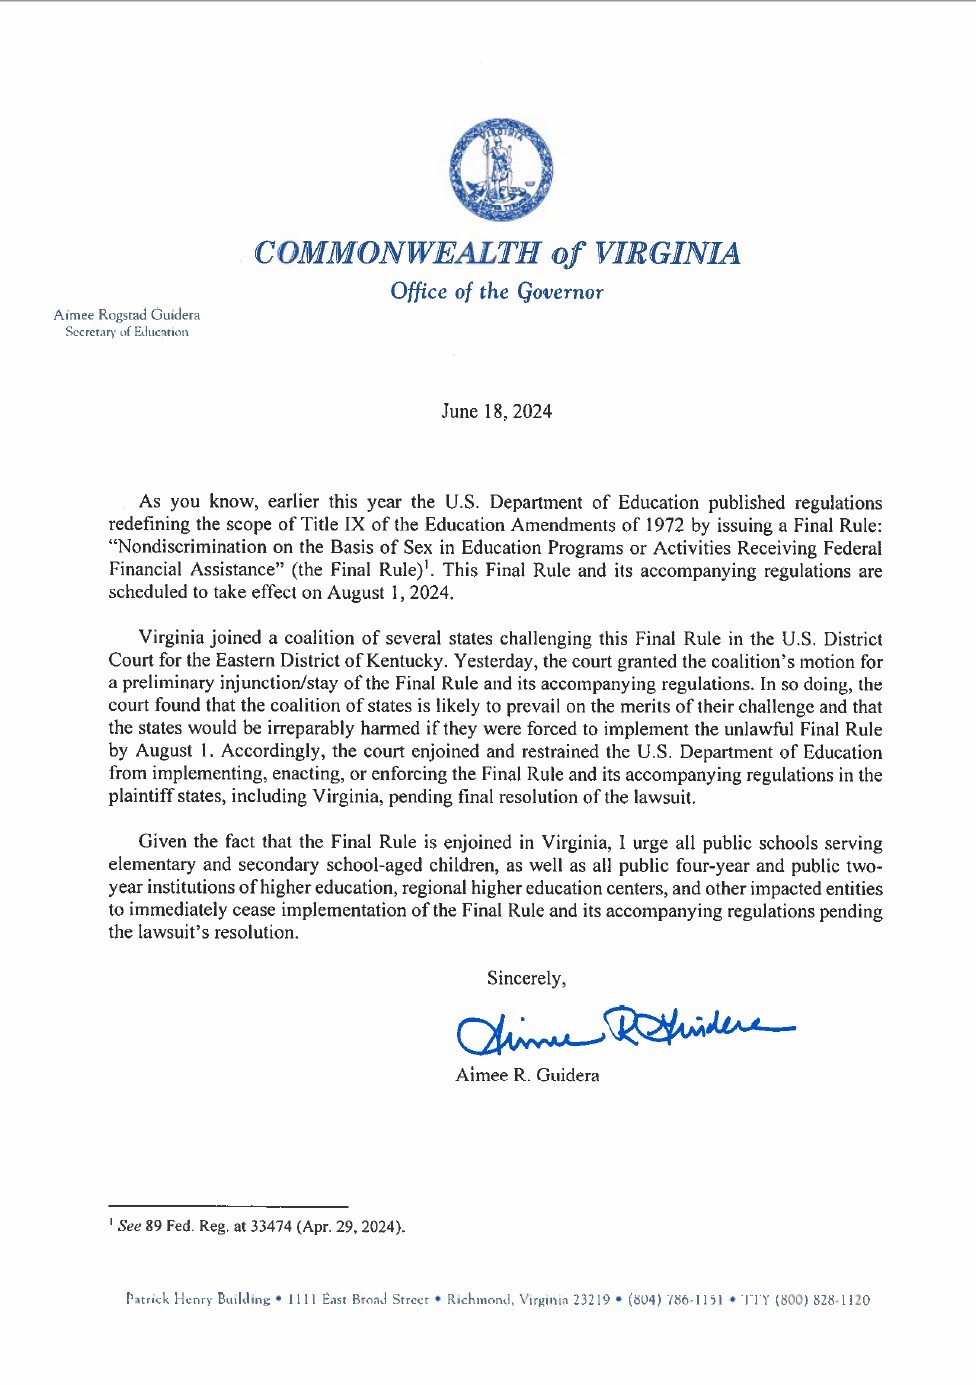 Secretary Guidera's letter, linked above for the full PDF